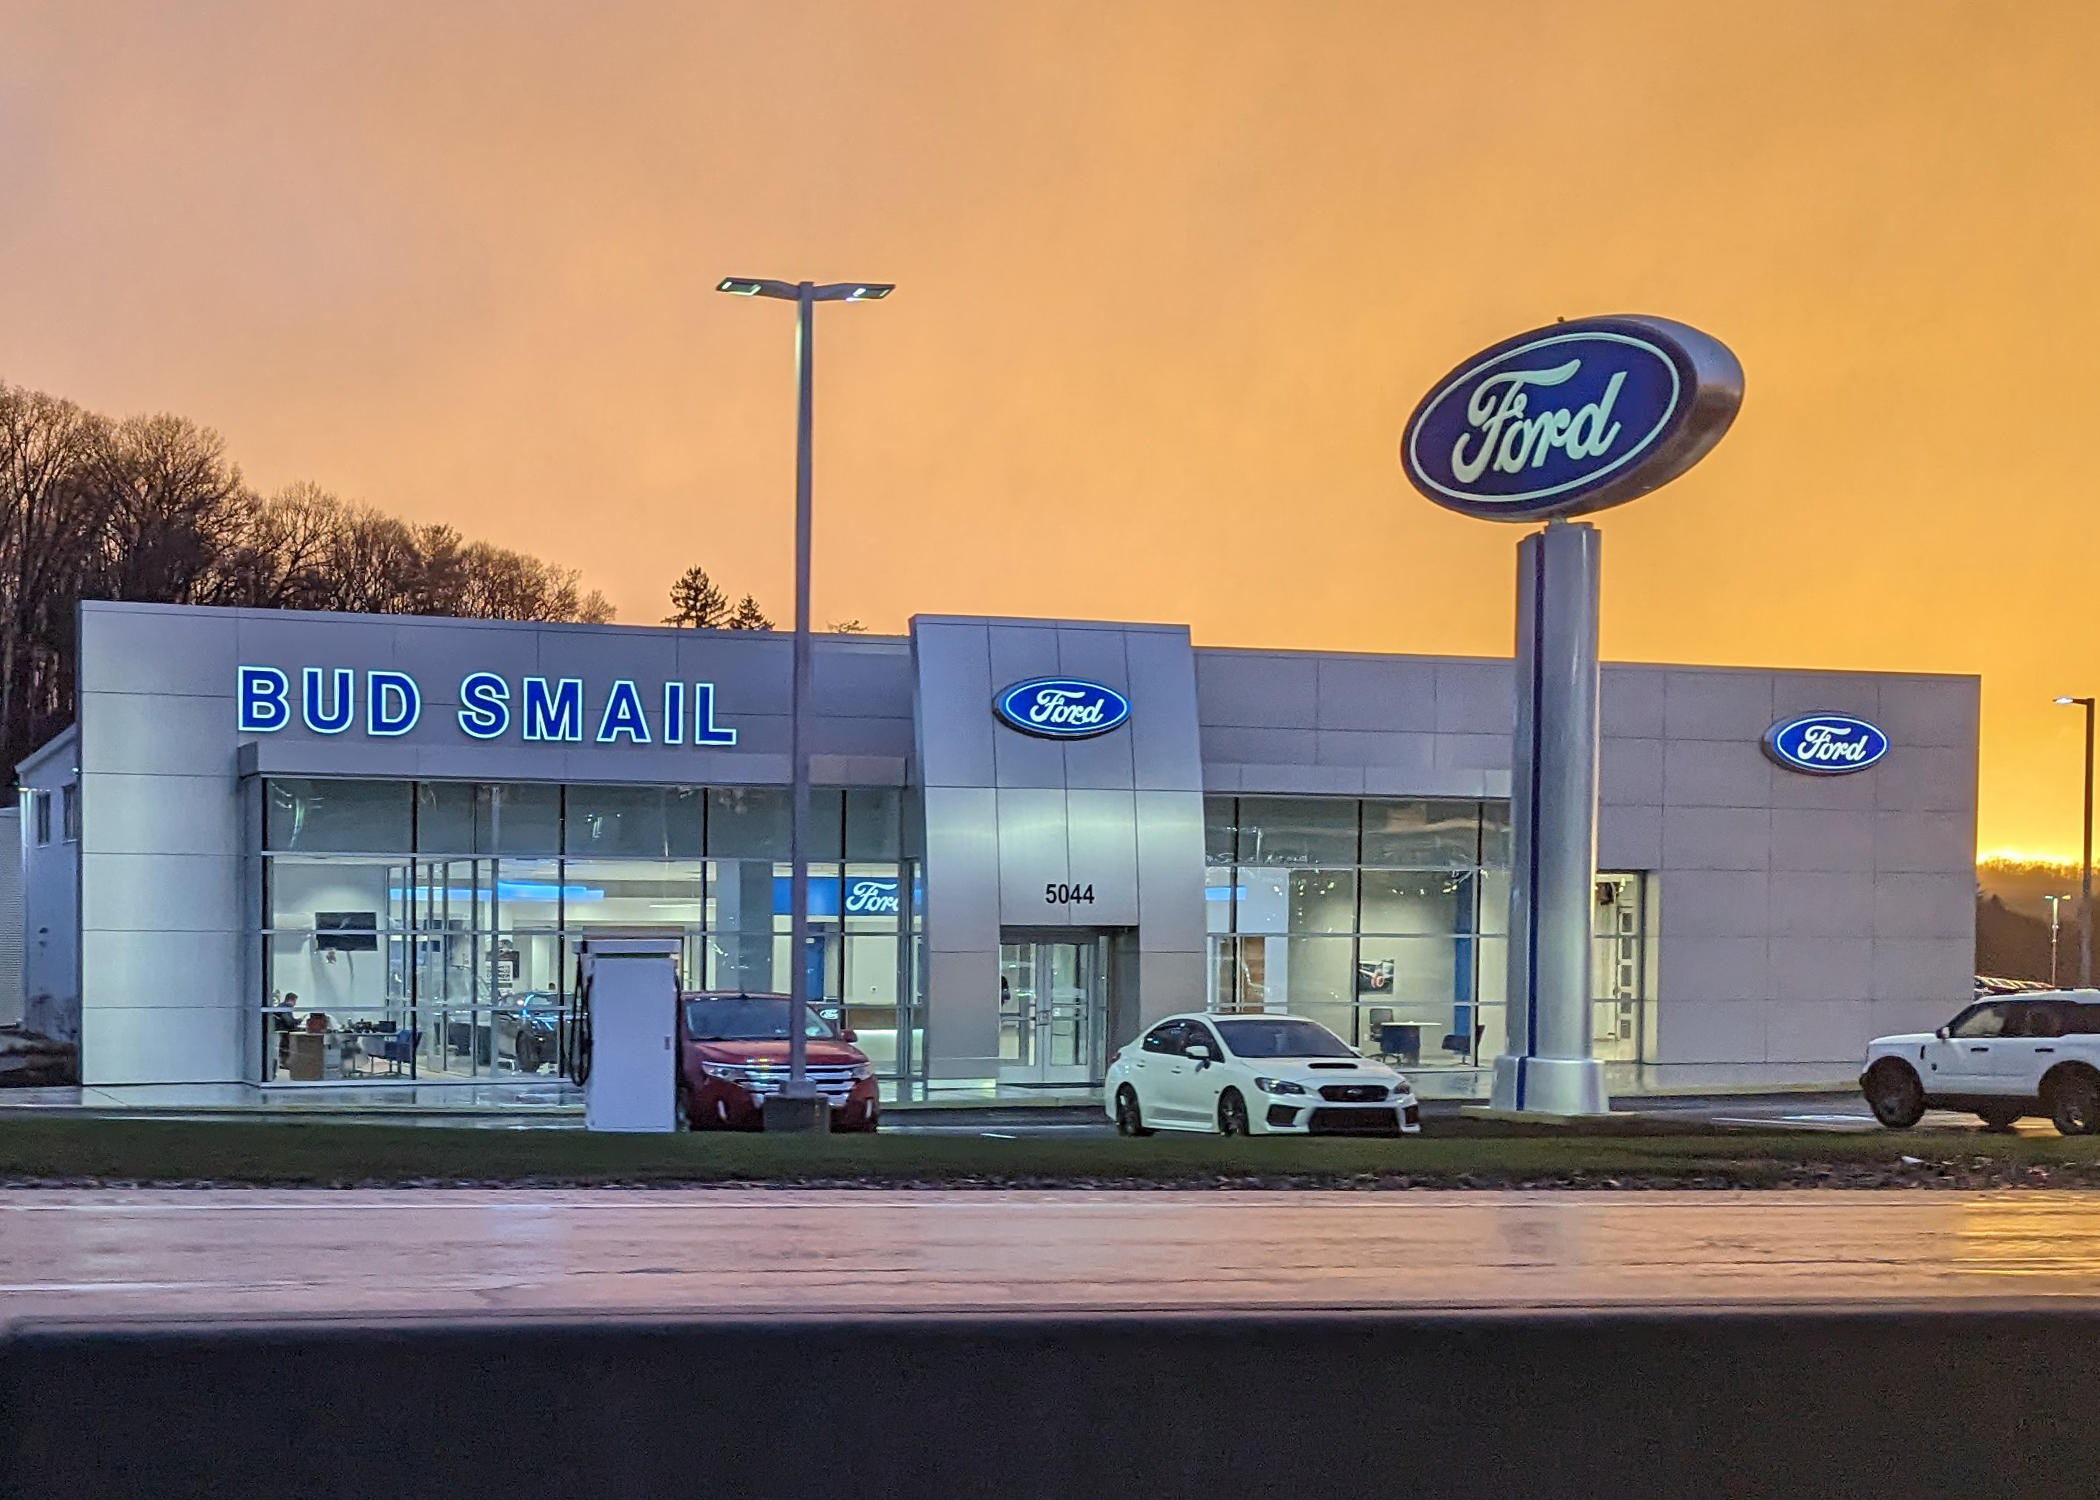 New Ford Building in Greensburg PA